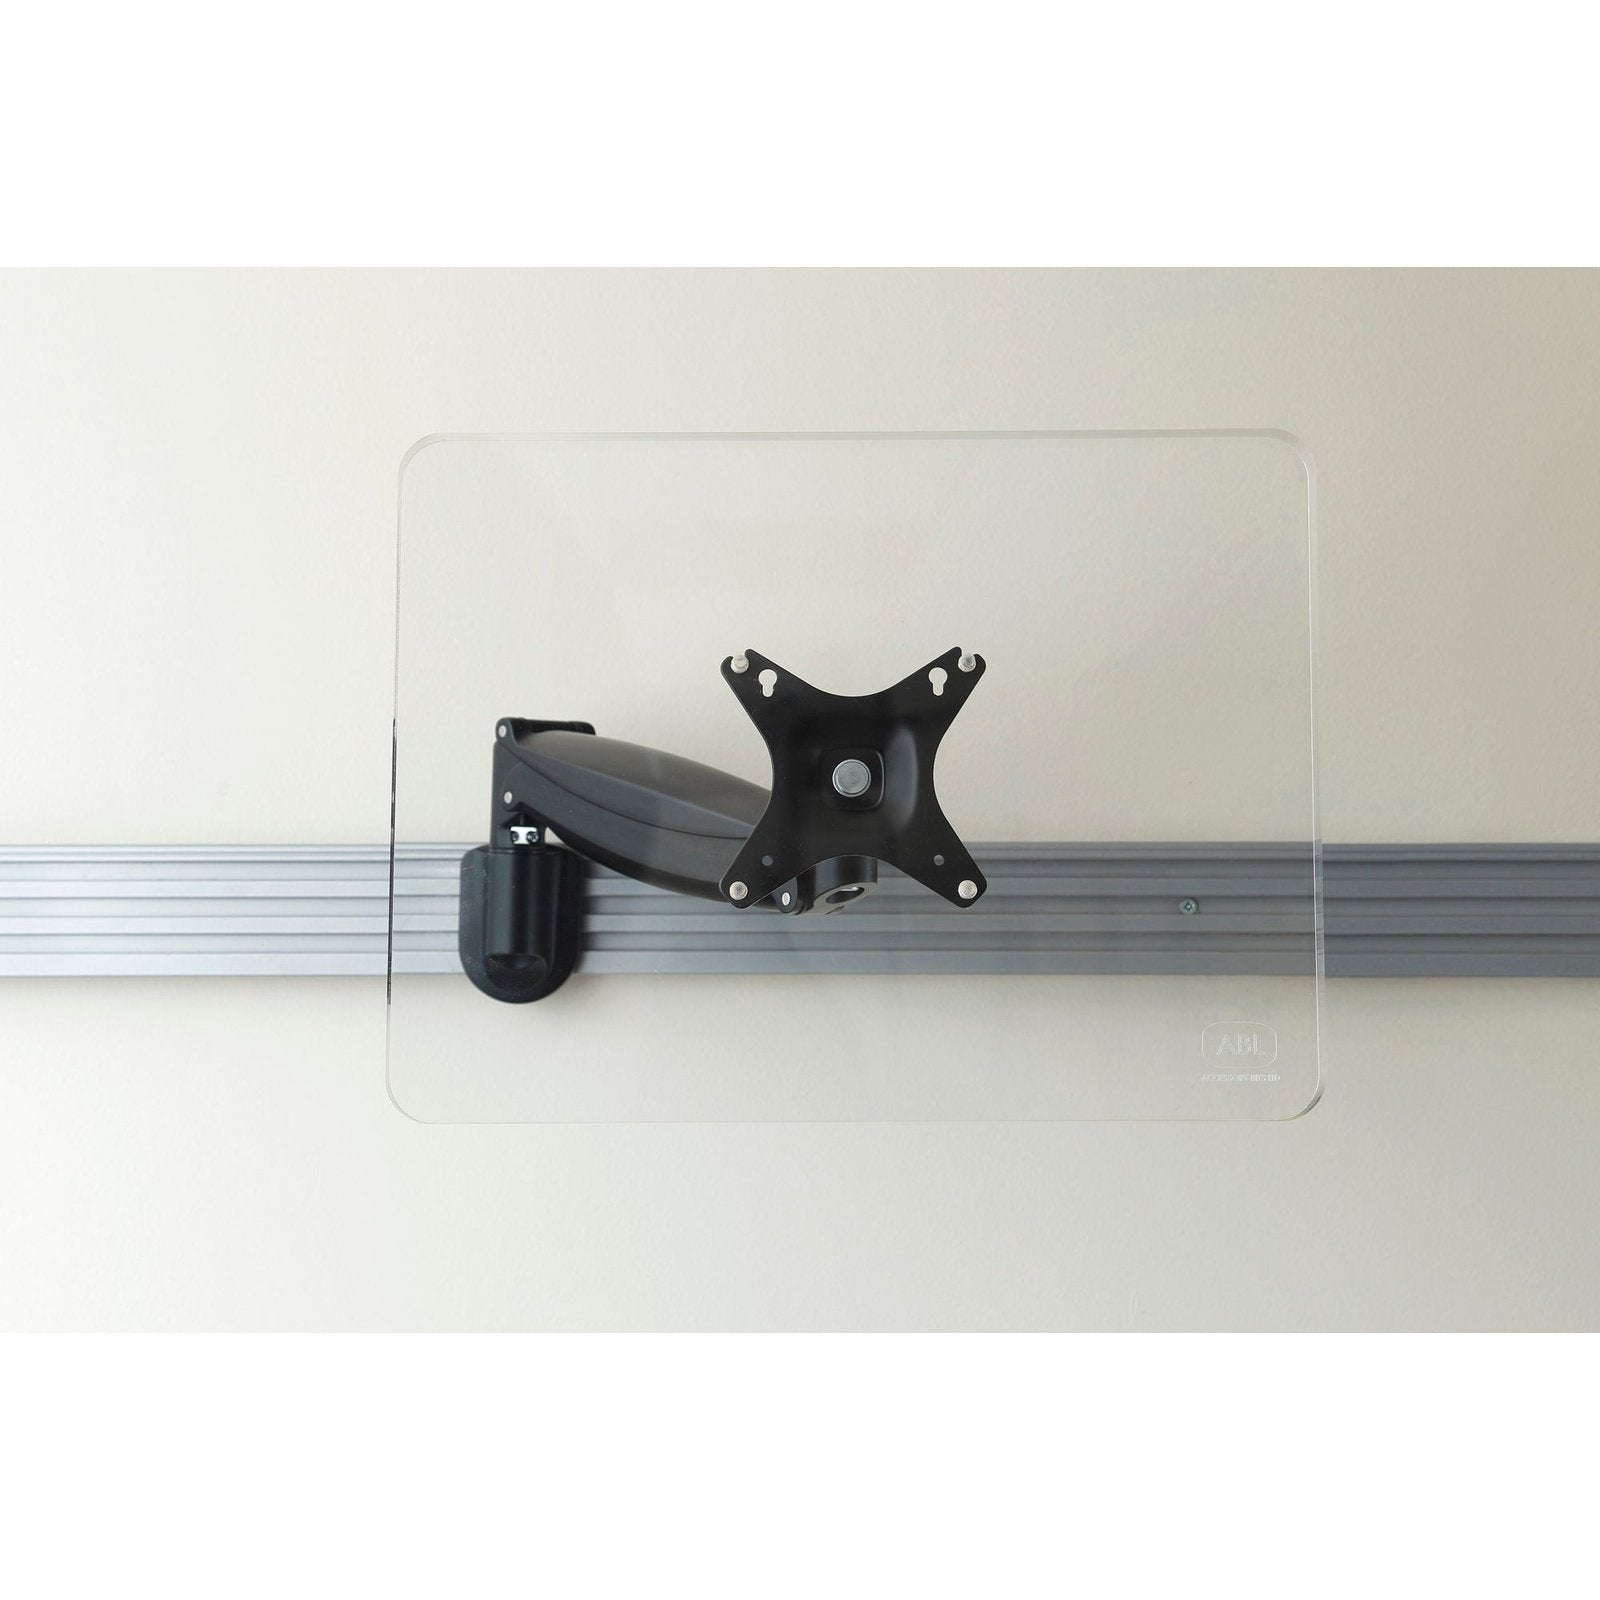 Impulse Gas Toolrail Mounted Monitor Arm - Steel, Self-Assembly, 1-Year Guarantee - Ergonomic Office Accessory